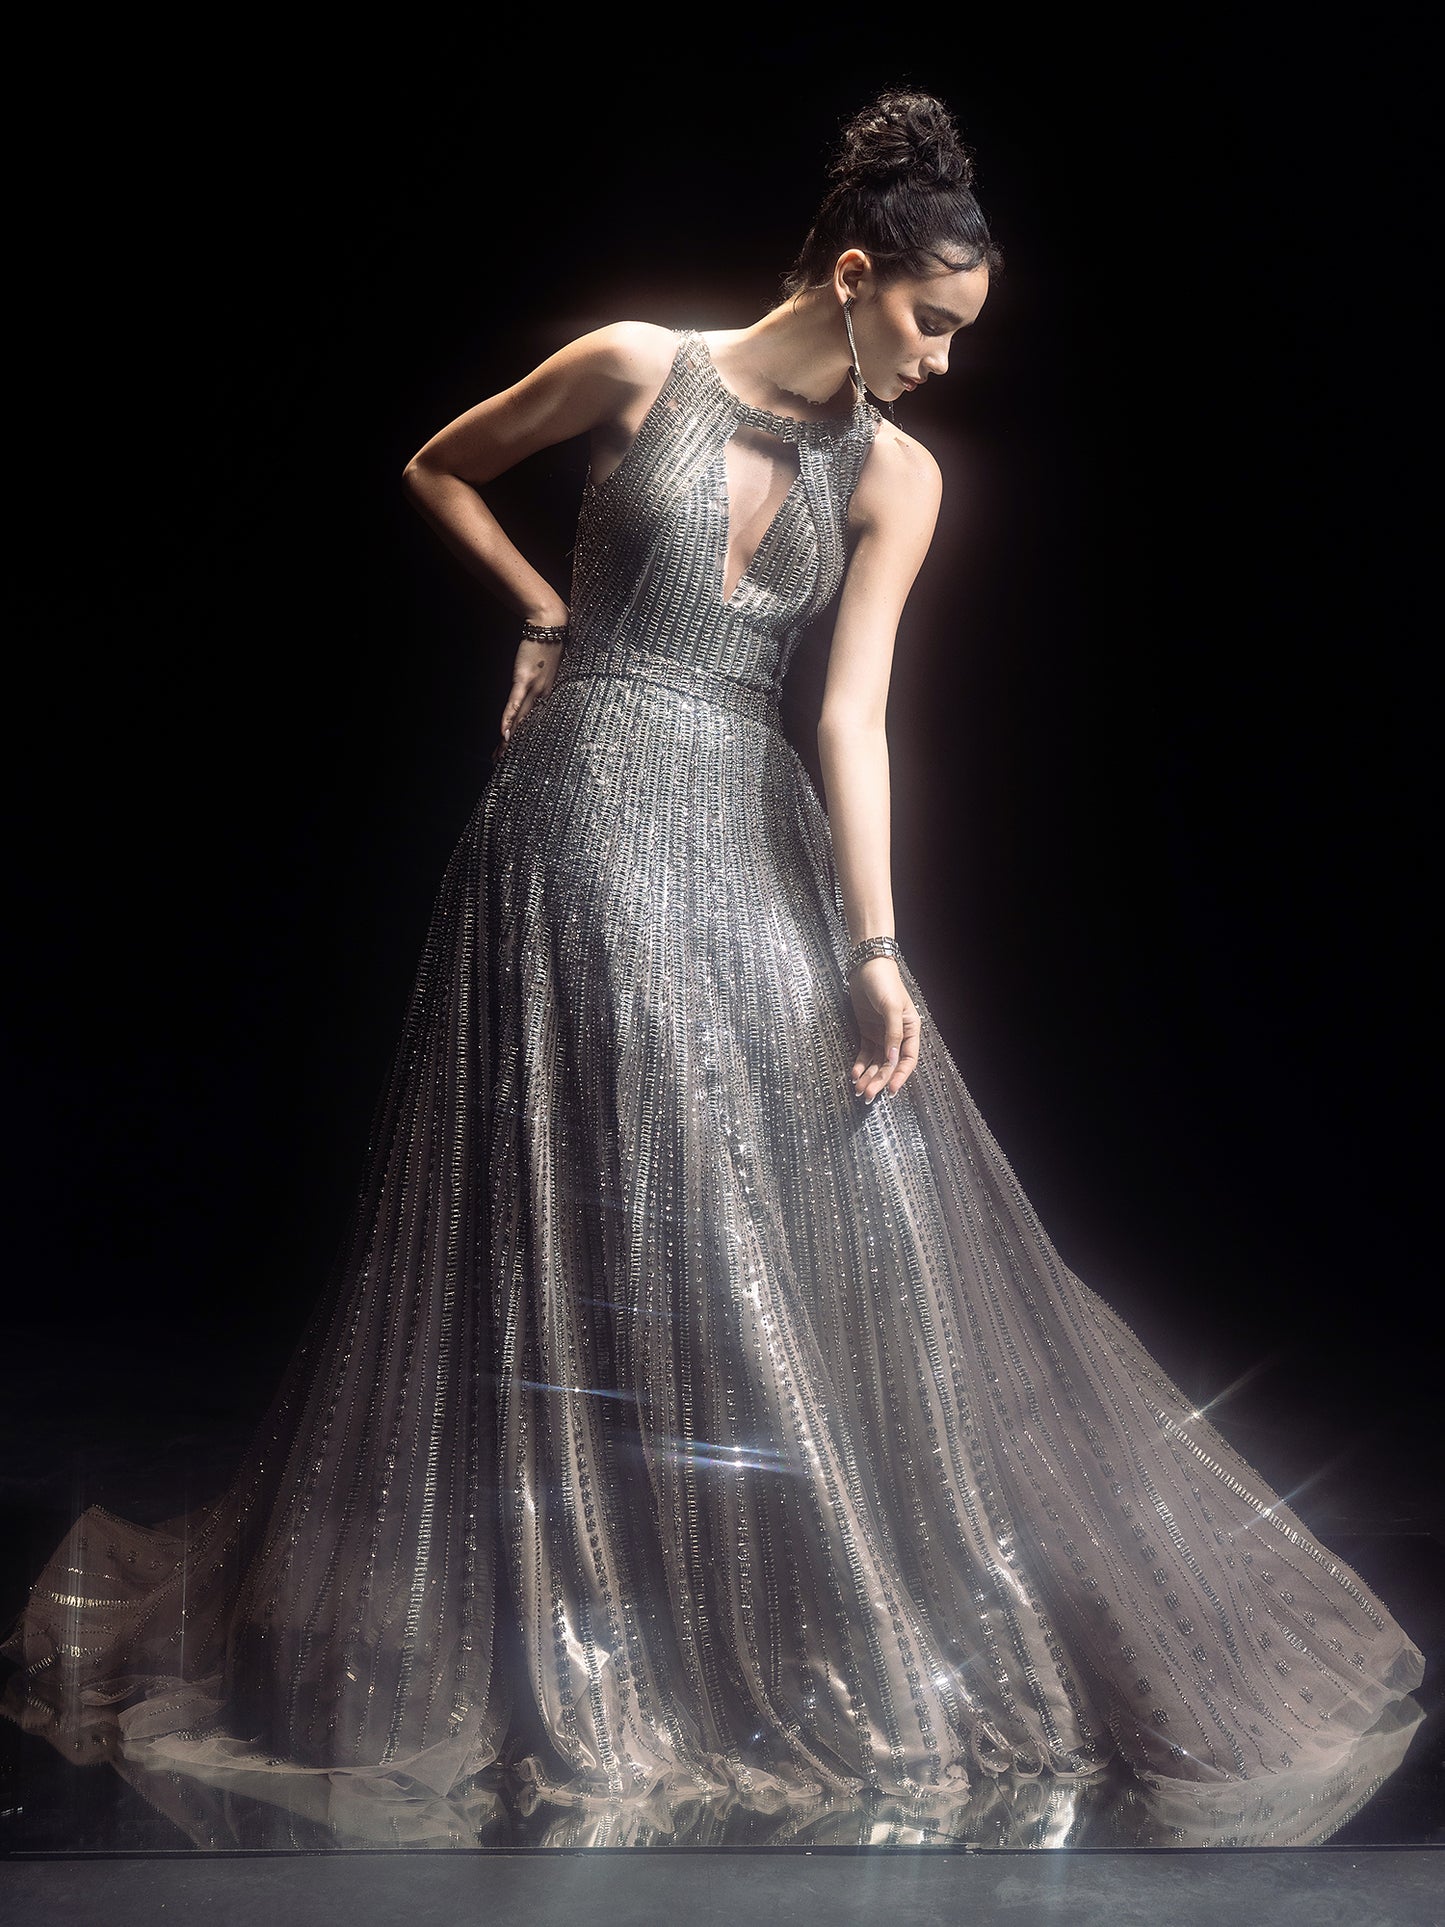 Fully Embellished crystals And Metallic Stripes Gown